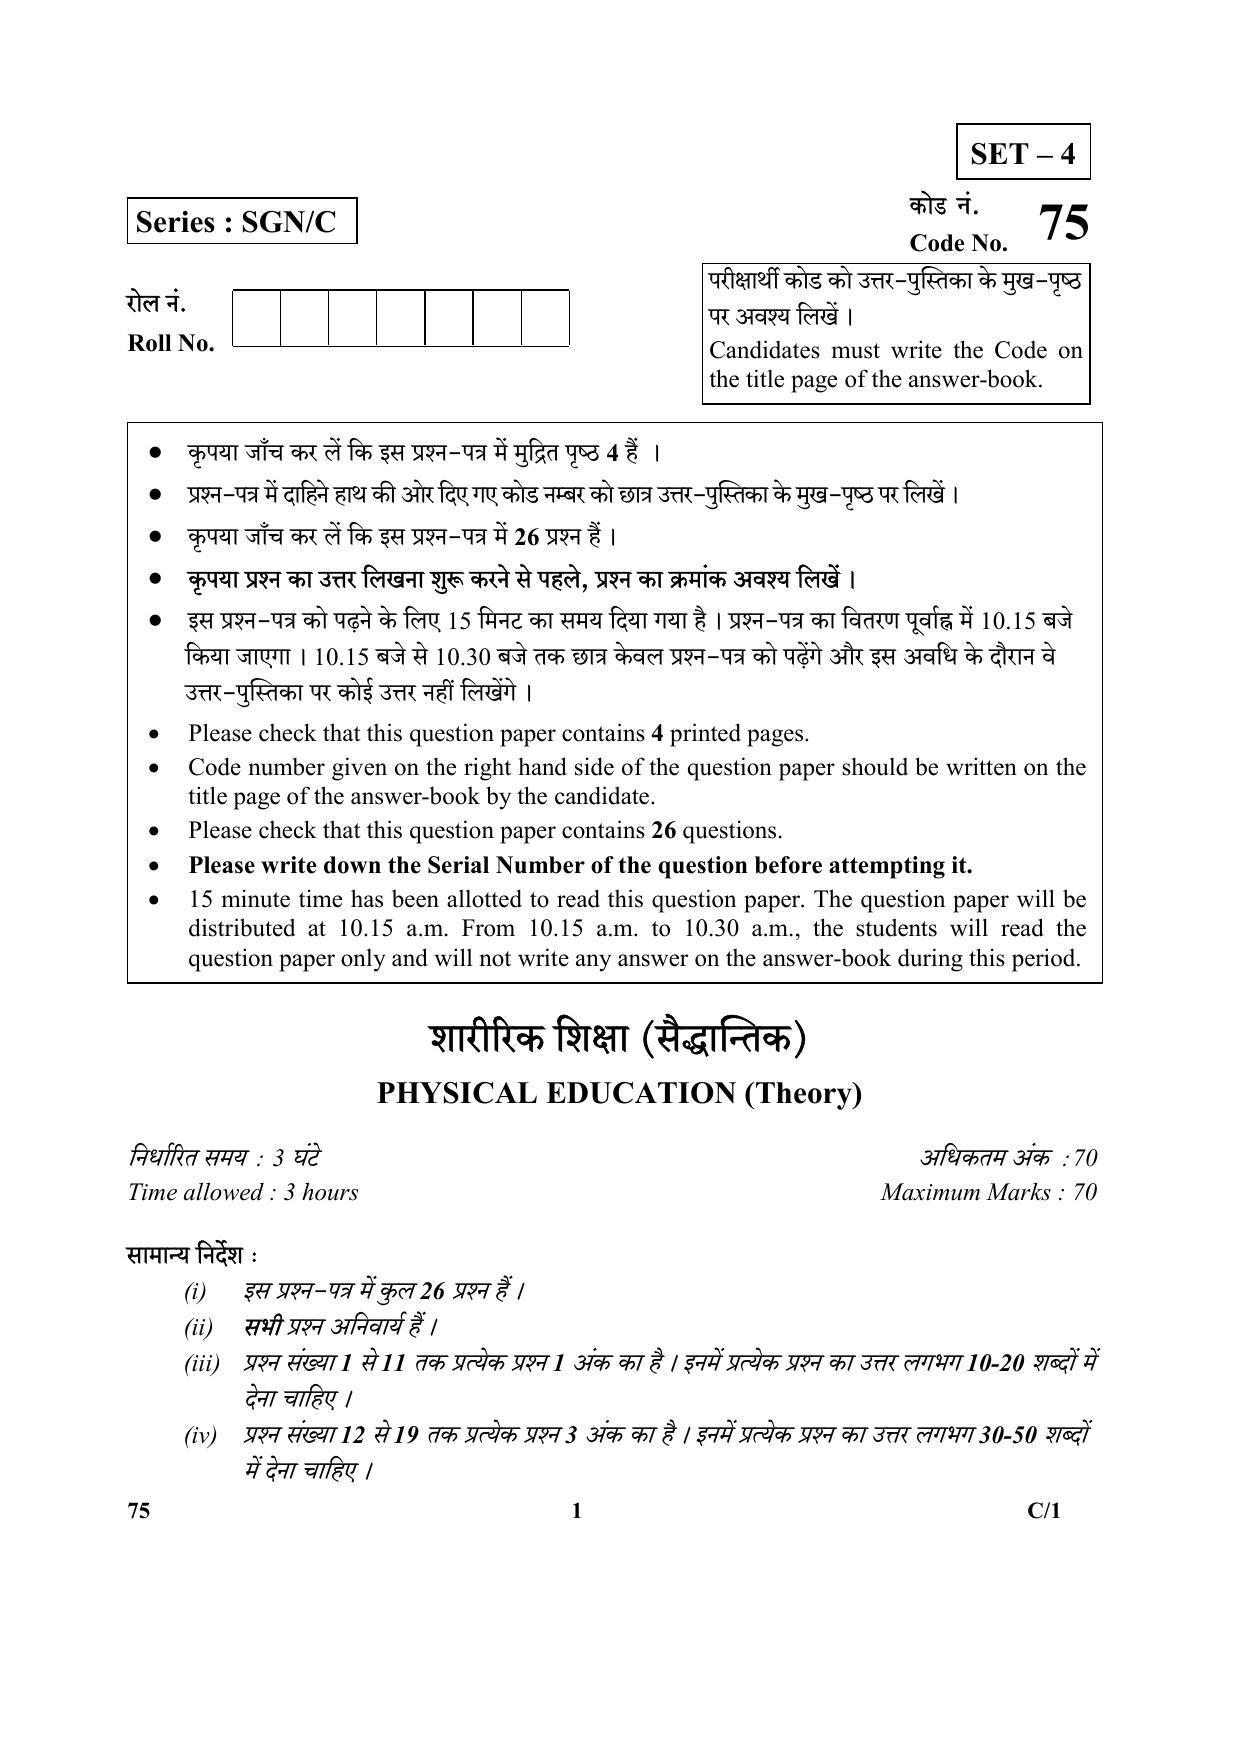 CBSE Class 12 225 & 75 (Physical Education Theory) 2018 Compartment Question Paper - Page 5